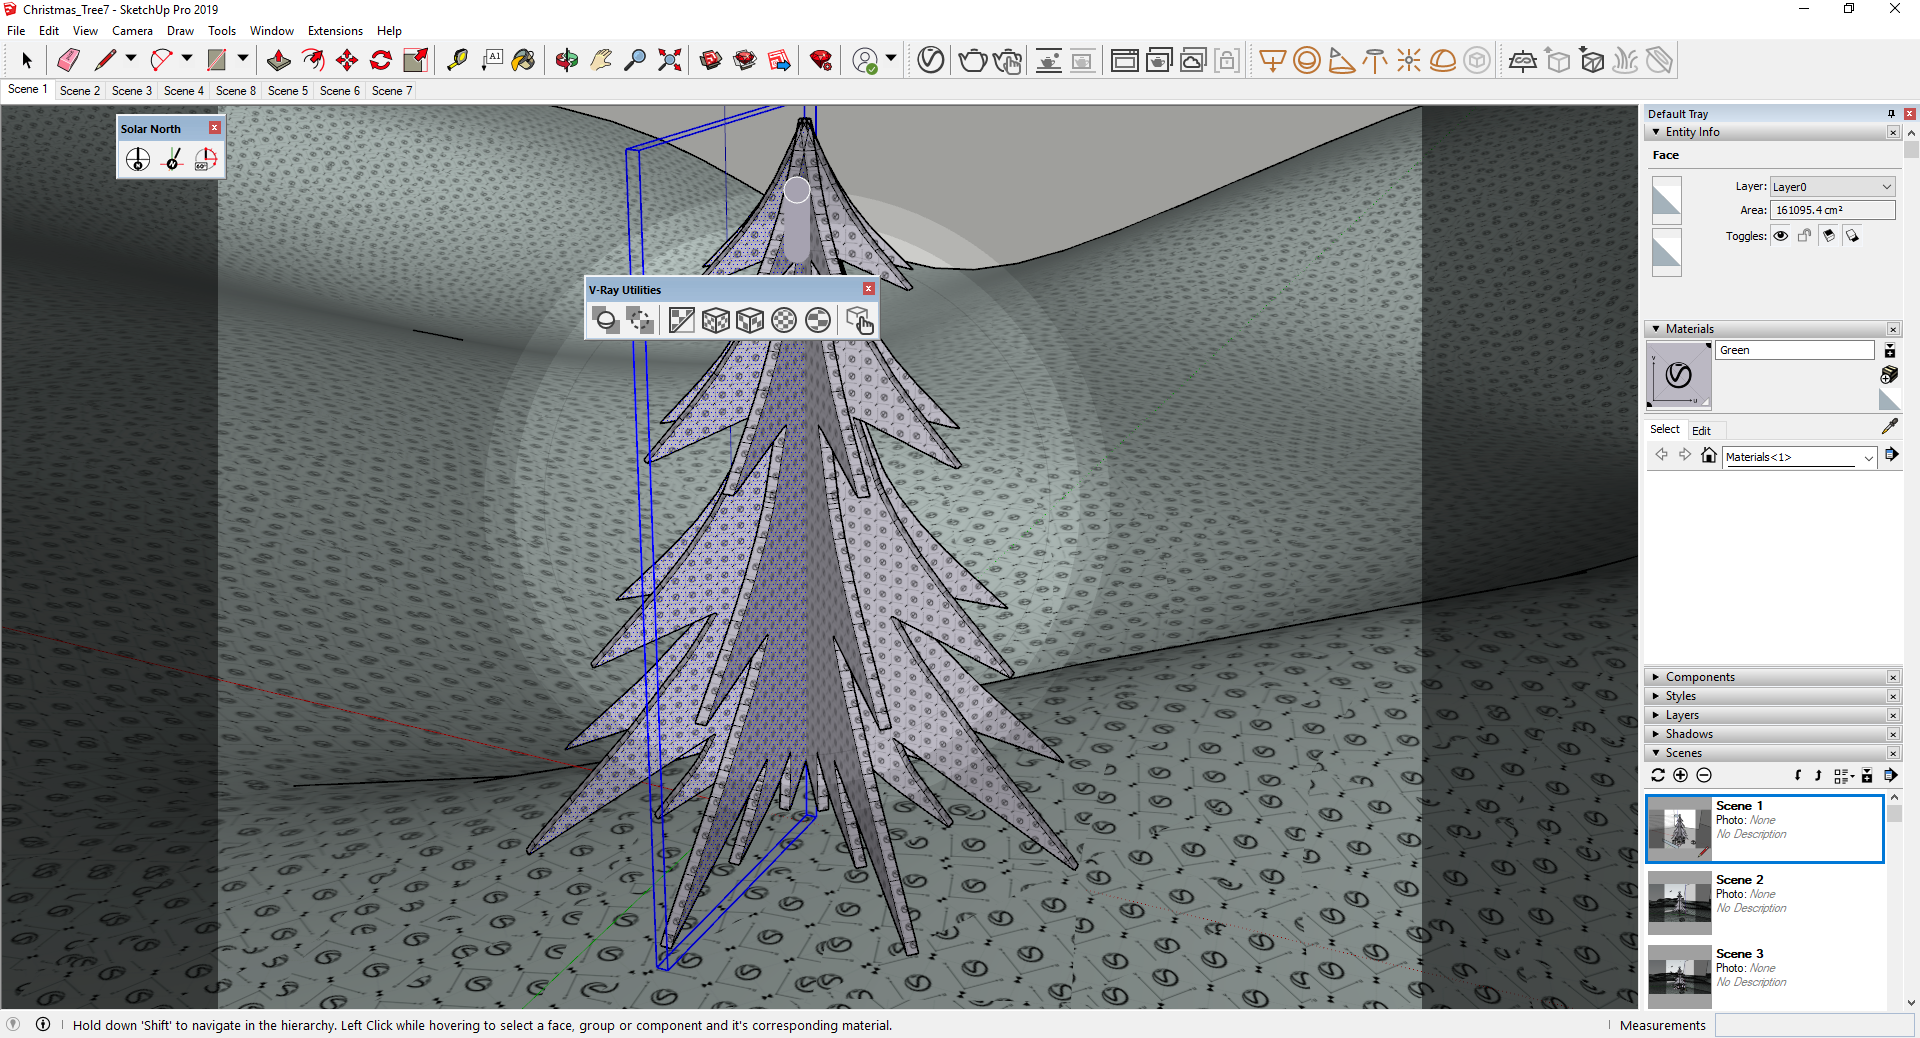 SketchUp file of Christmas tree with active V-Ray Utilities.